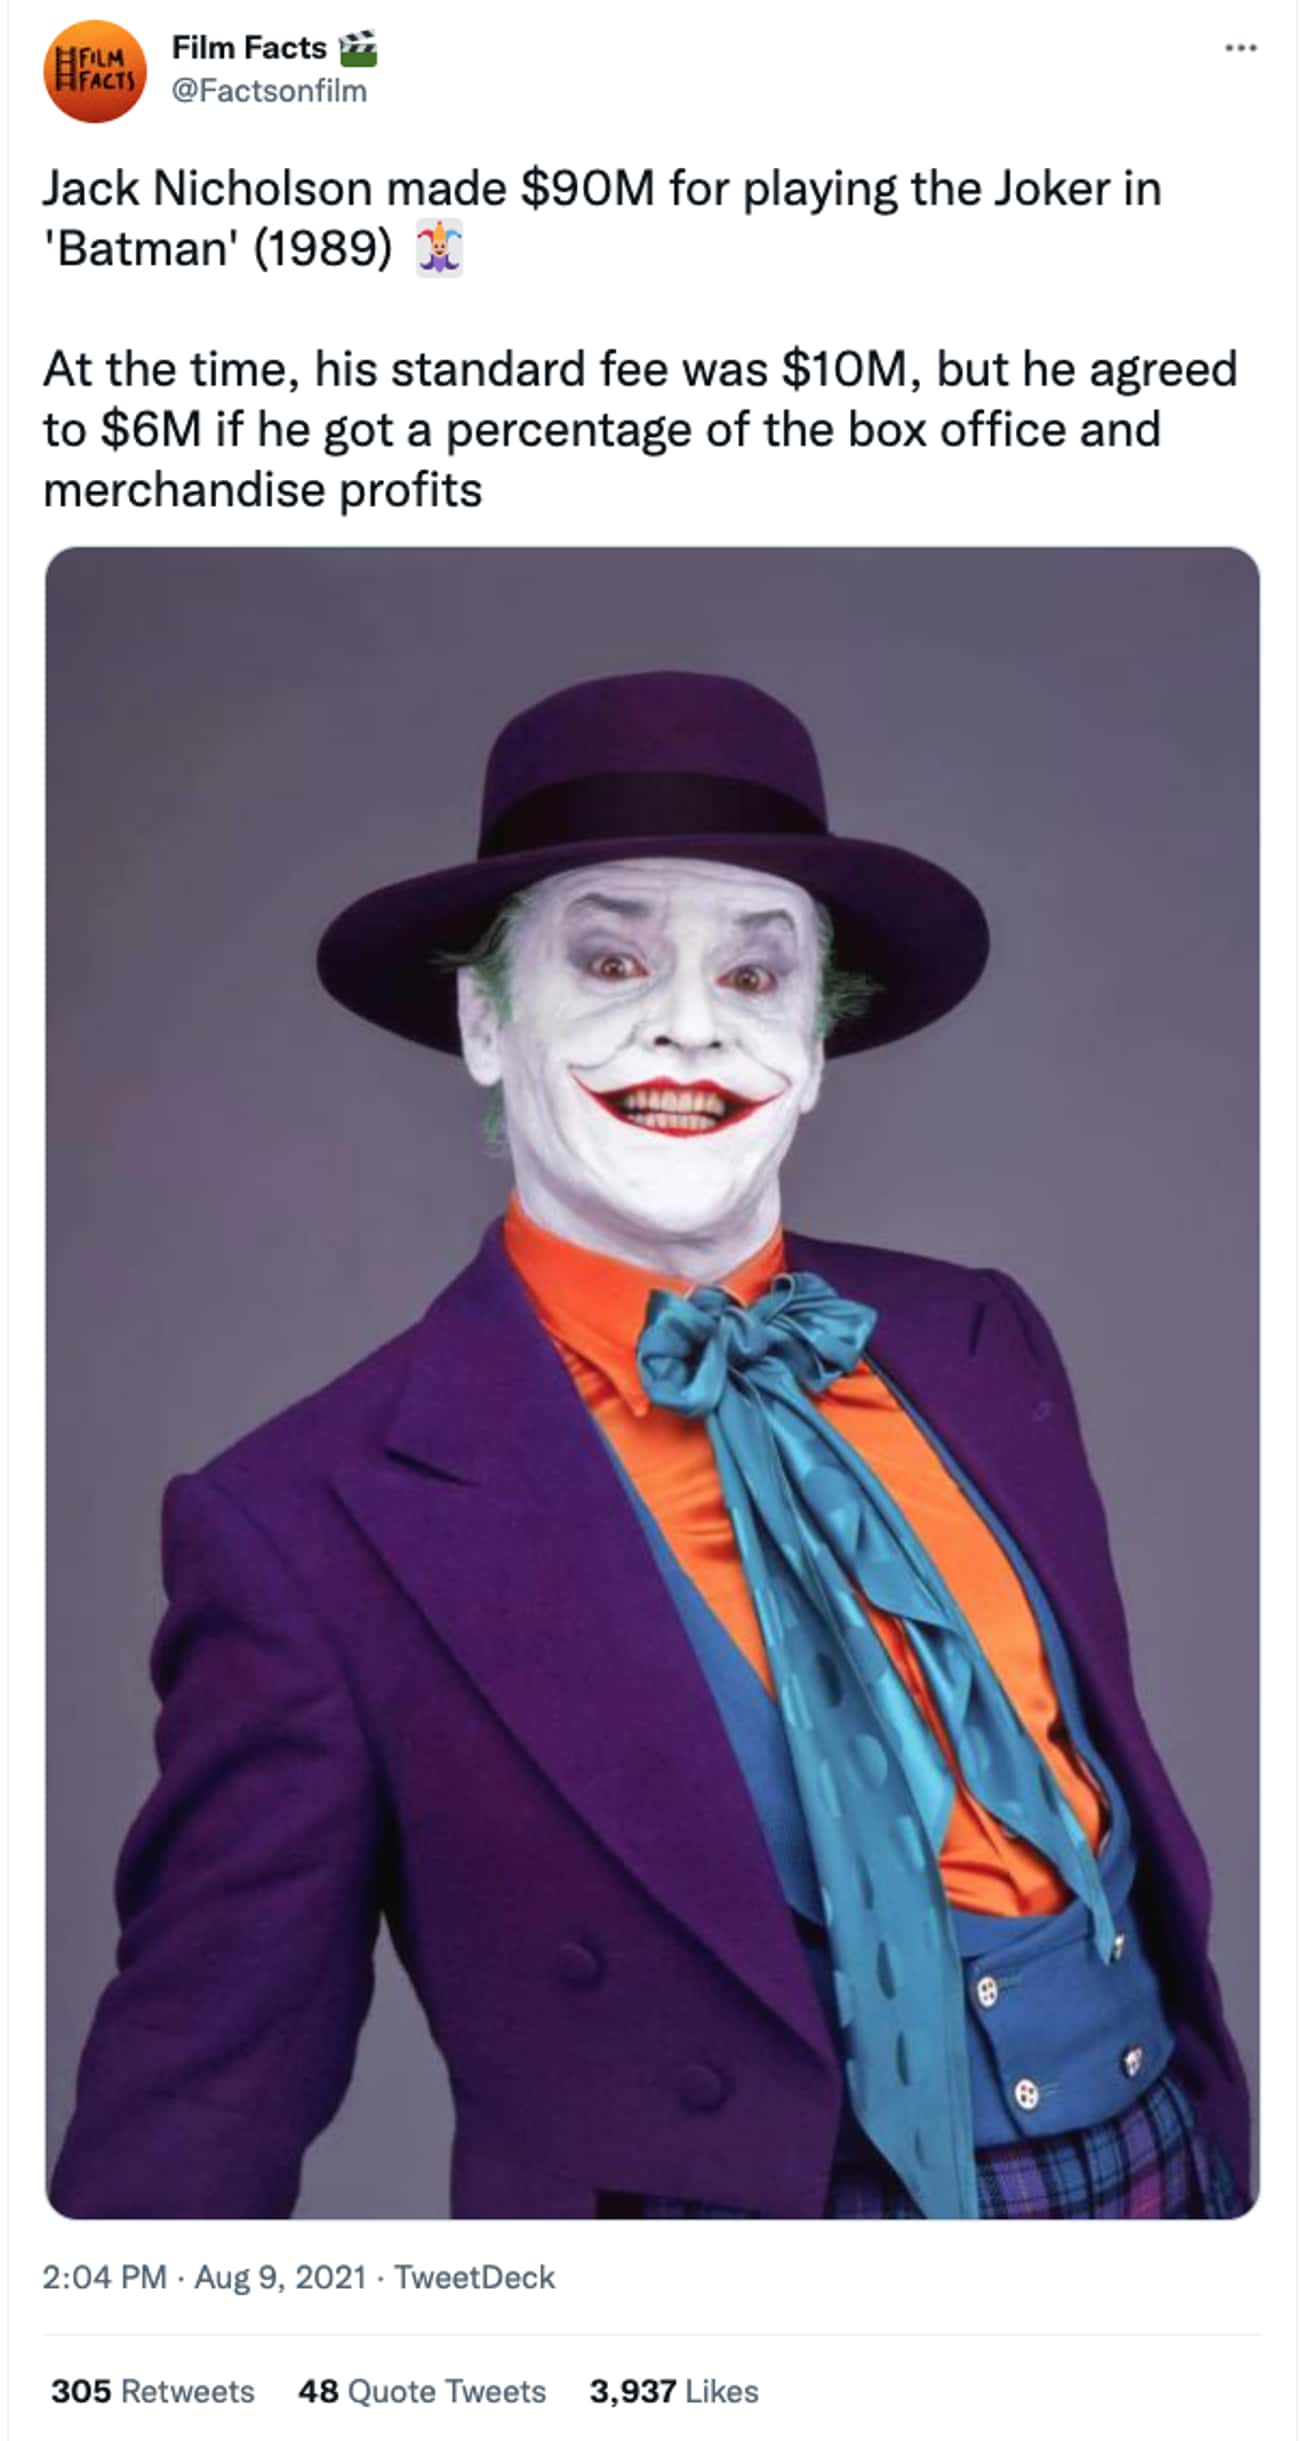 Jack Nicholson Made $90M For Playing The Joker In ‘Batman’ 